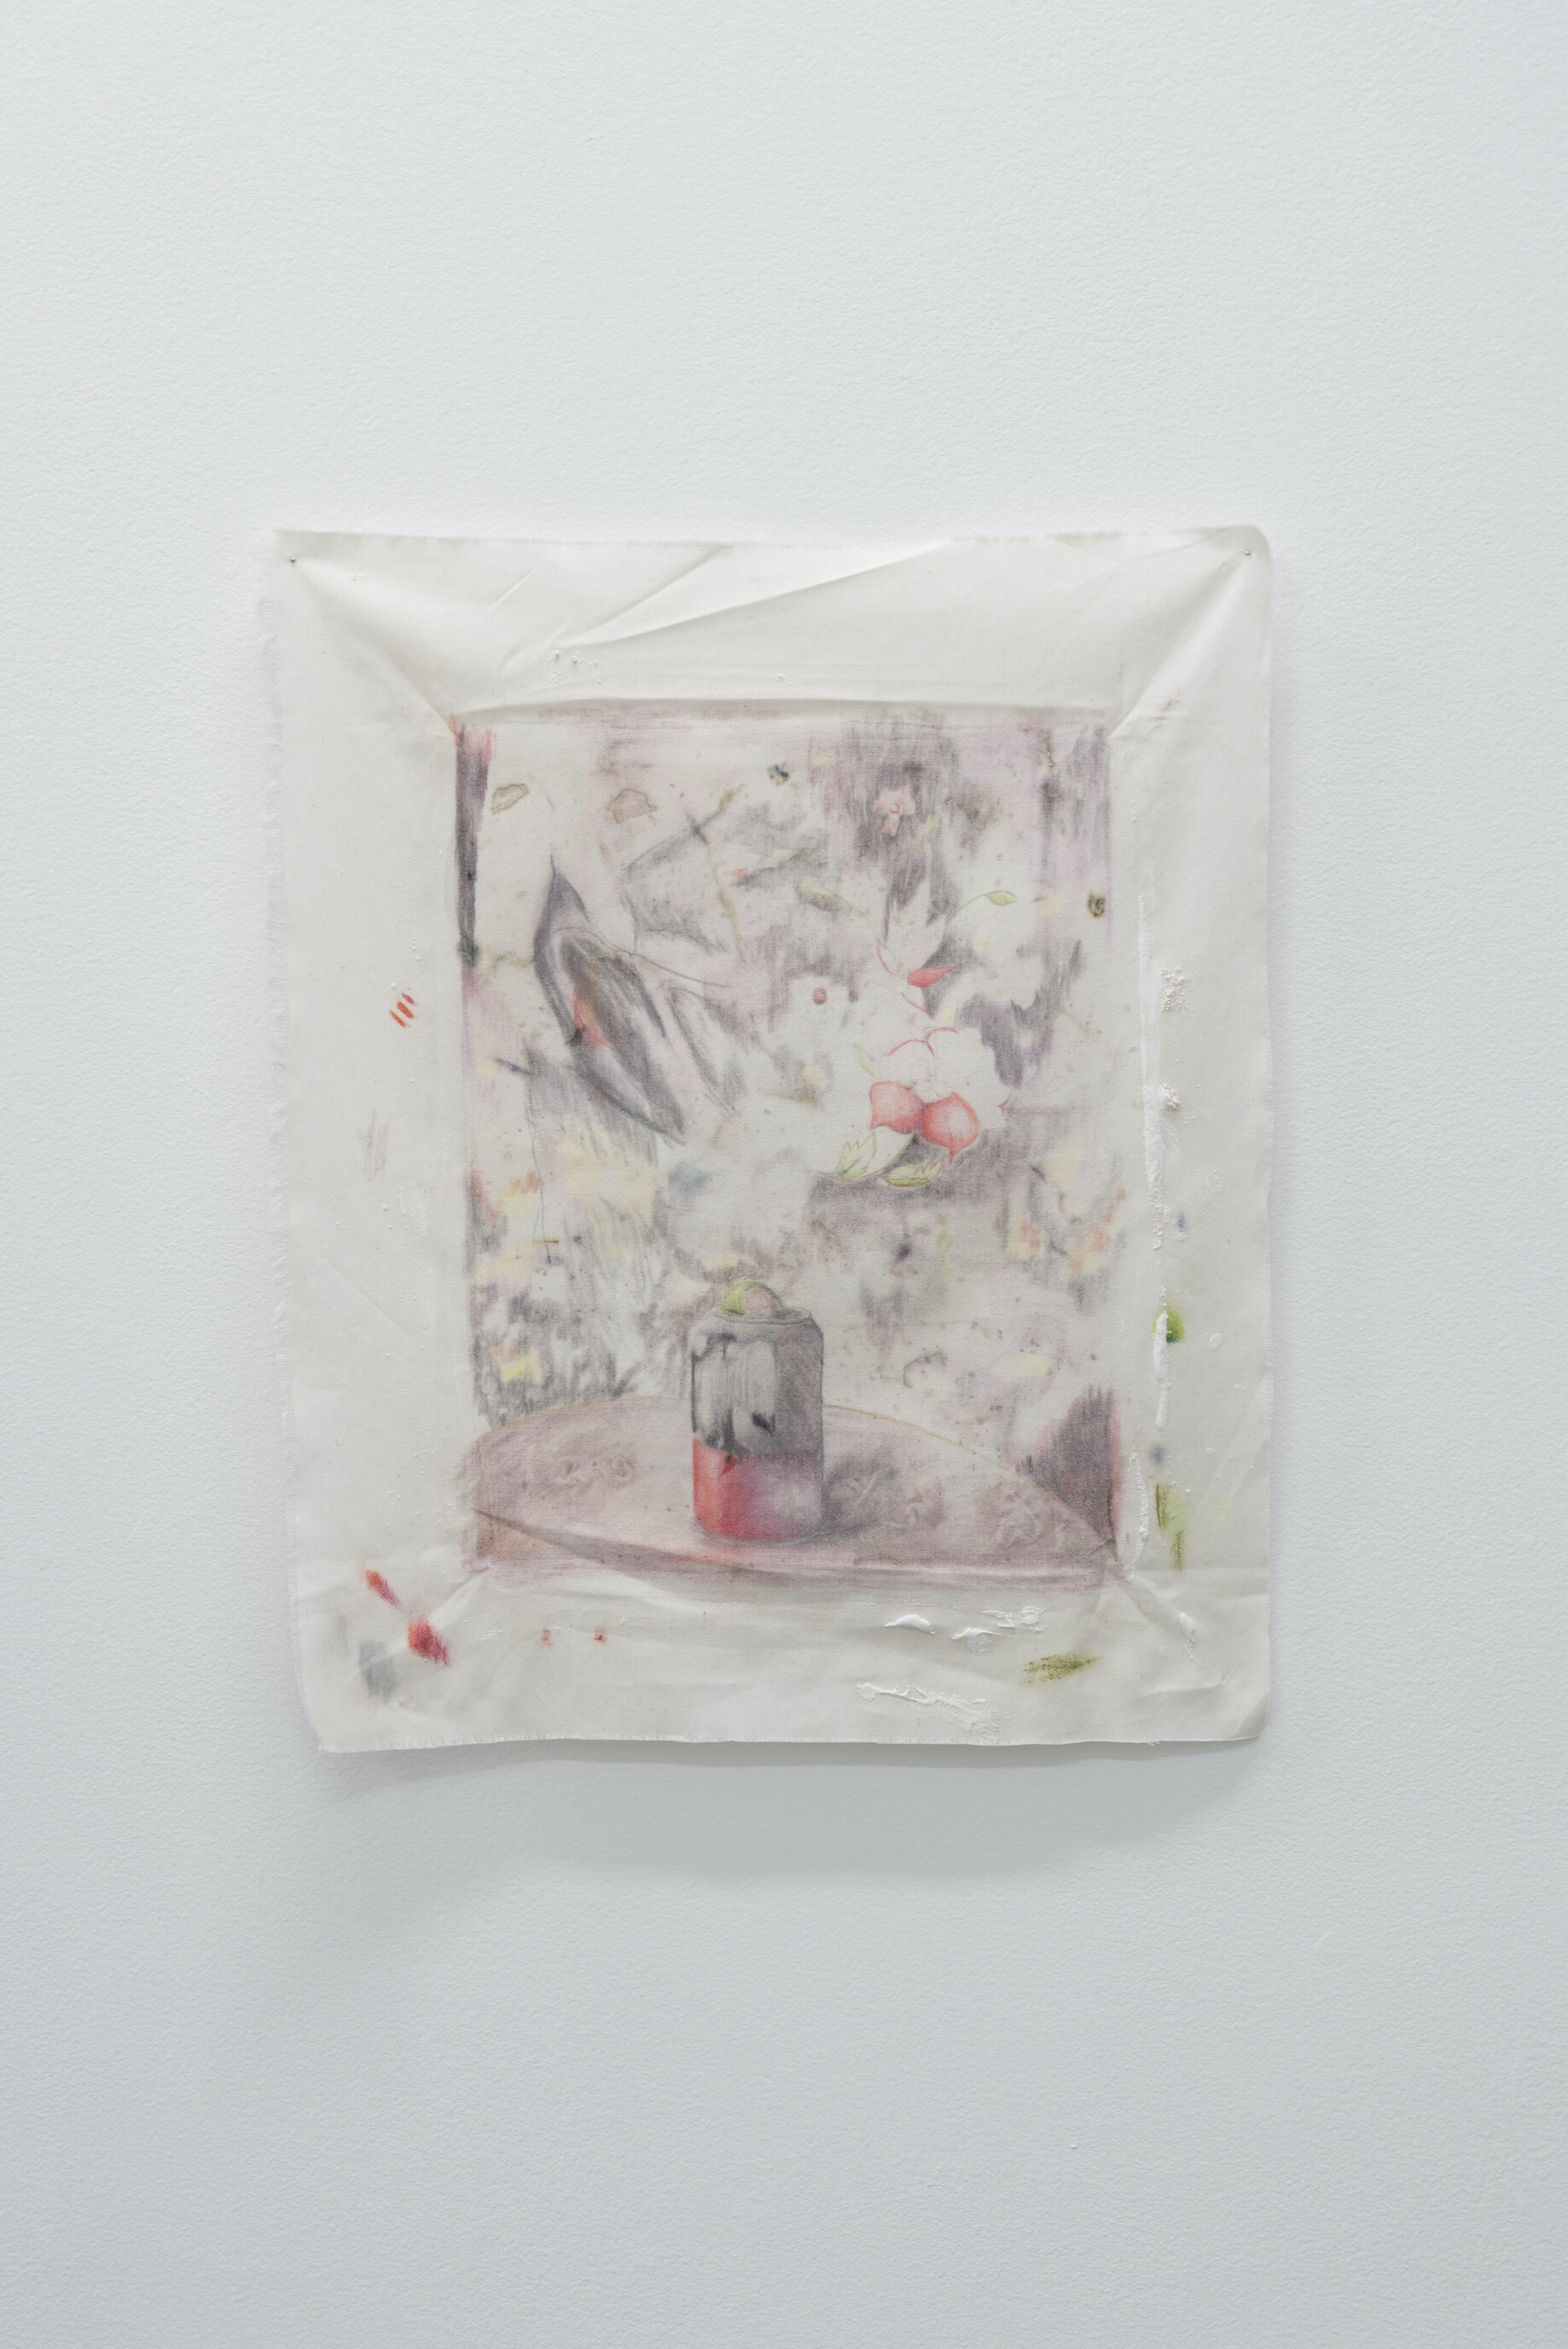  Alejandro Jiménez-Flores,  entre tus doblez, sensibilidades–character and sensibility, into the fold... ,​ 2019 flower petals dye, soft-pastels, plaster, and pins on muslin   	  